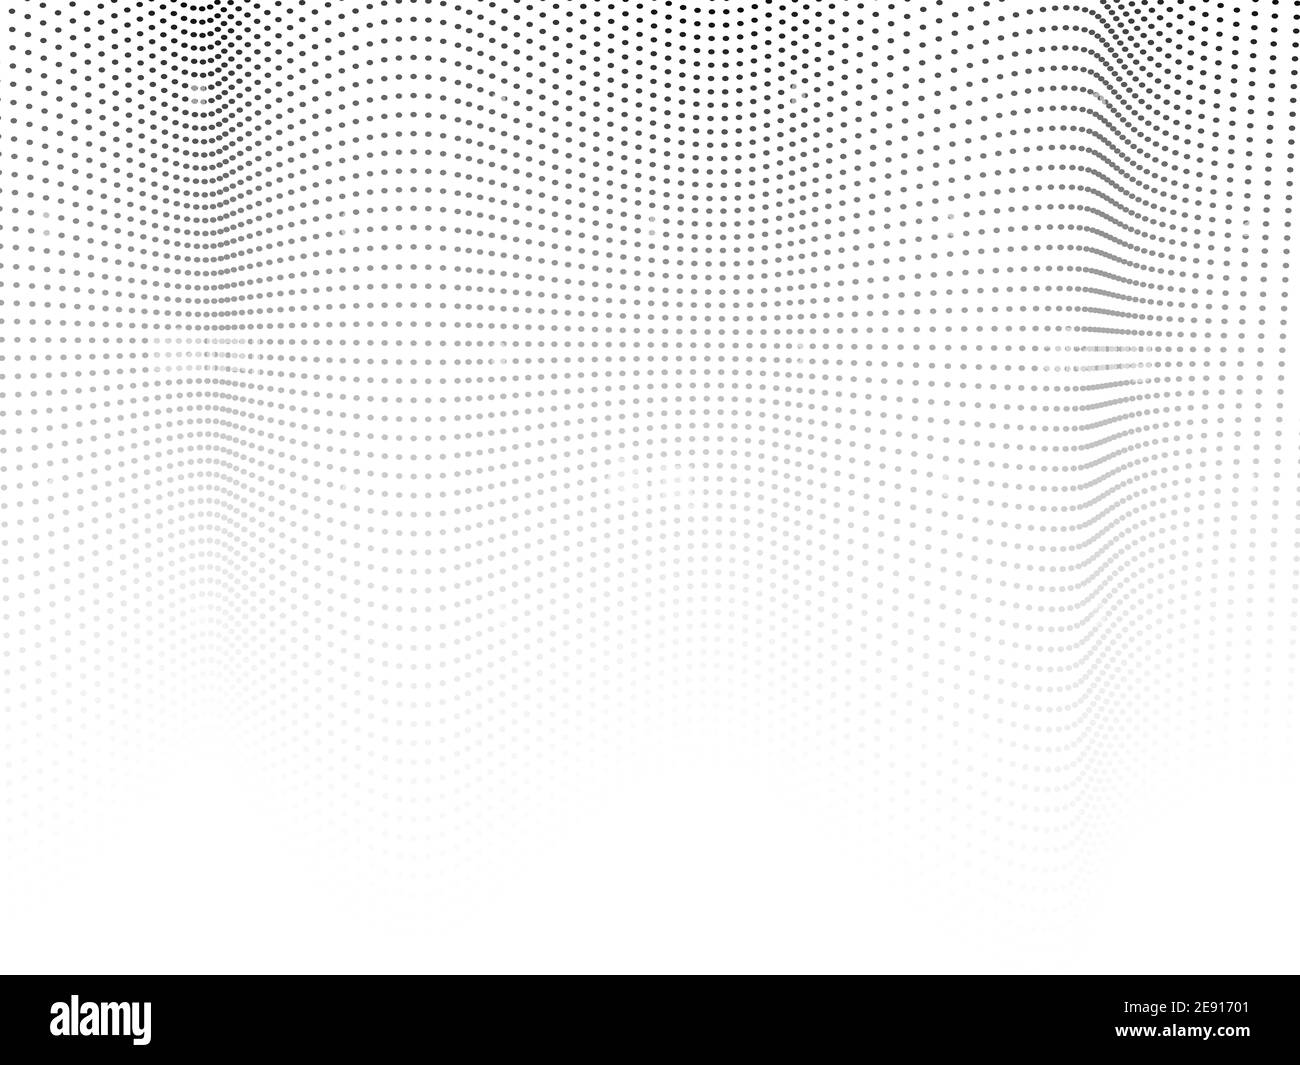 Gray spots, white background. Halftone textured pattern. Dotted undulating lines. Monochrome op art design. Vector waves. Abstract tech concept. EPS10 Stock Vector